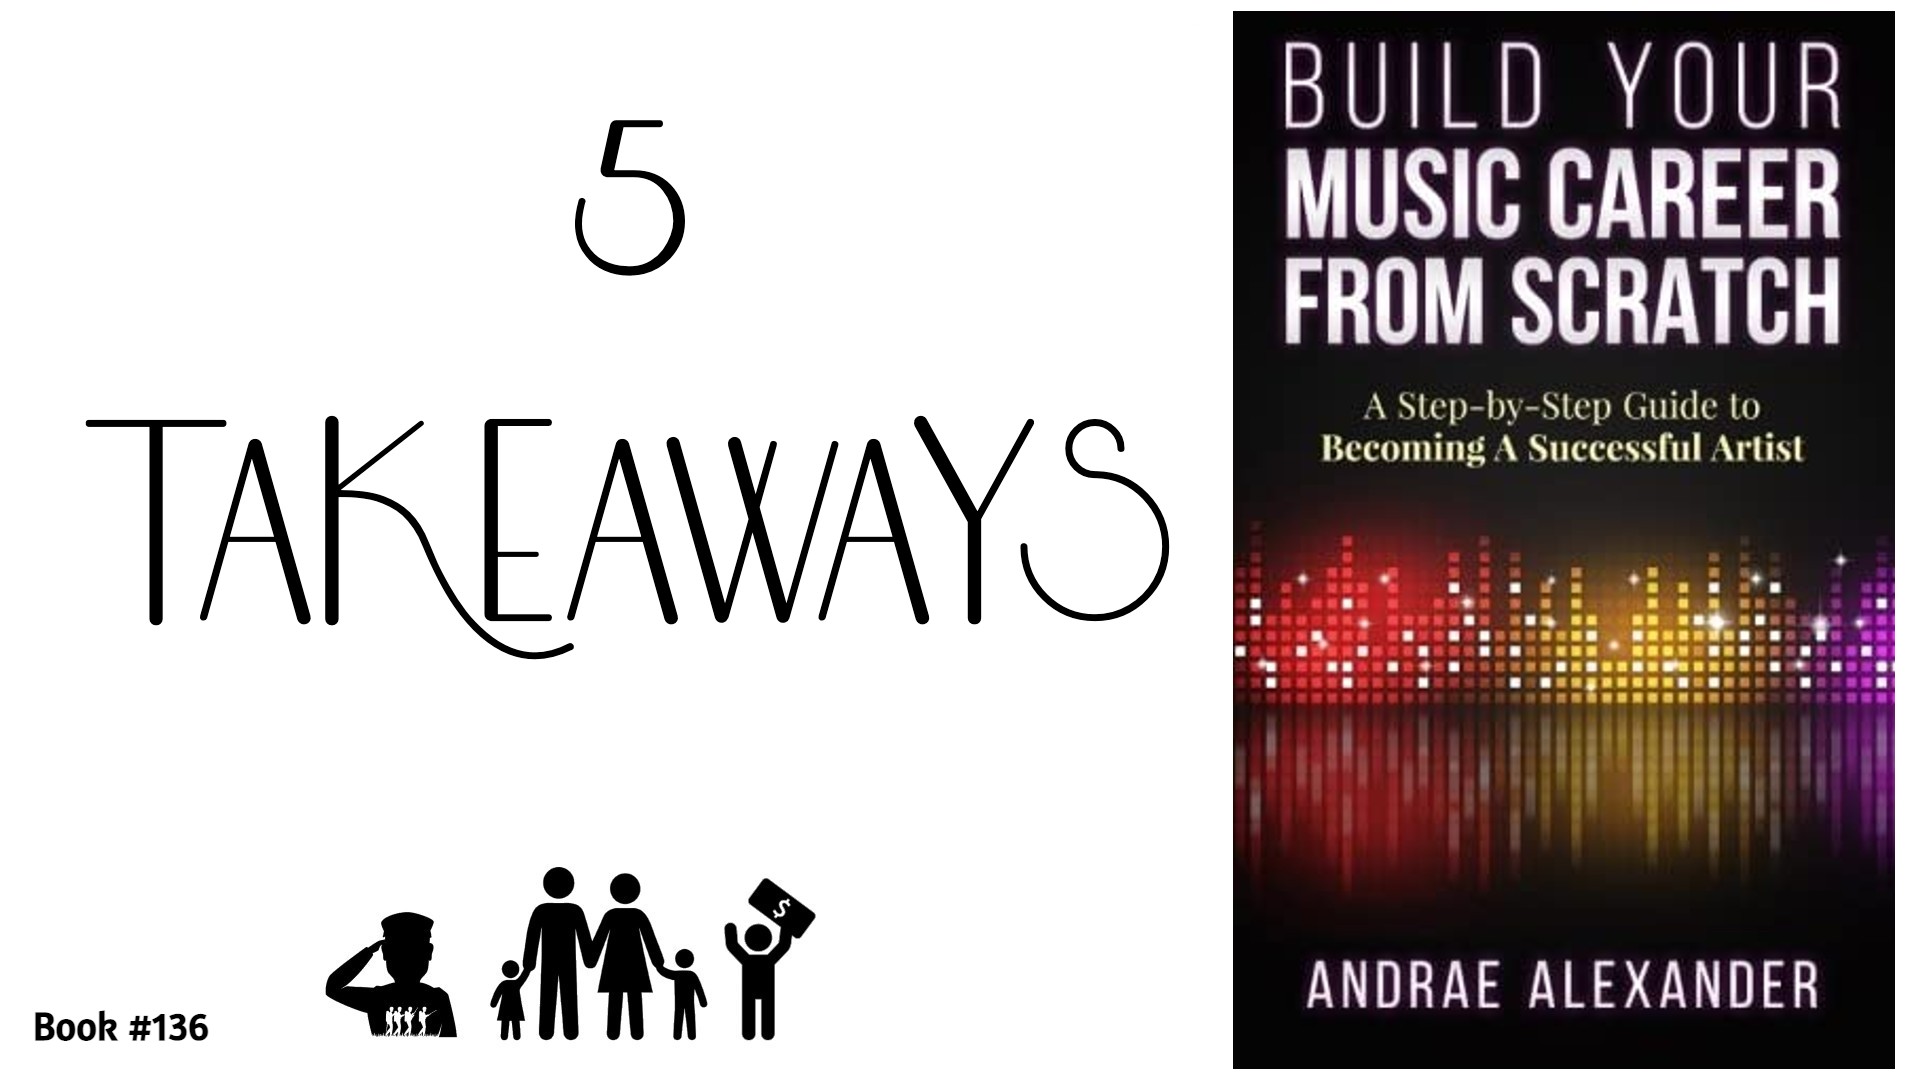 5 Takeaways from “Build Your Music Career From Scratch”